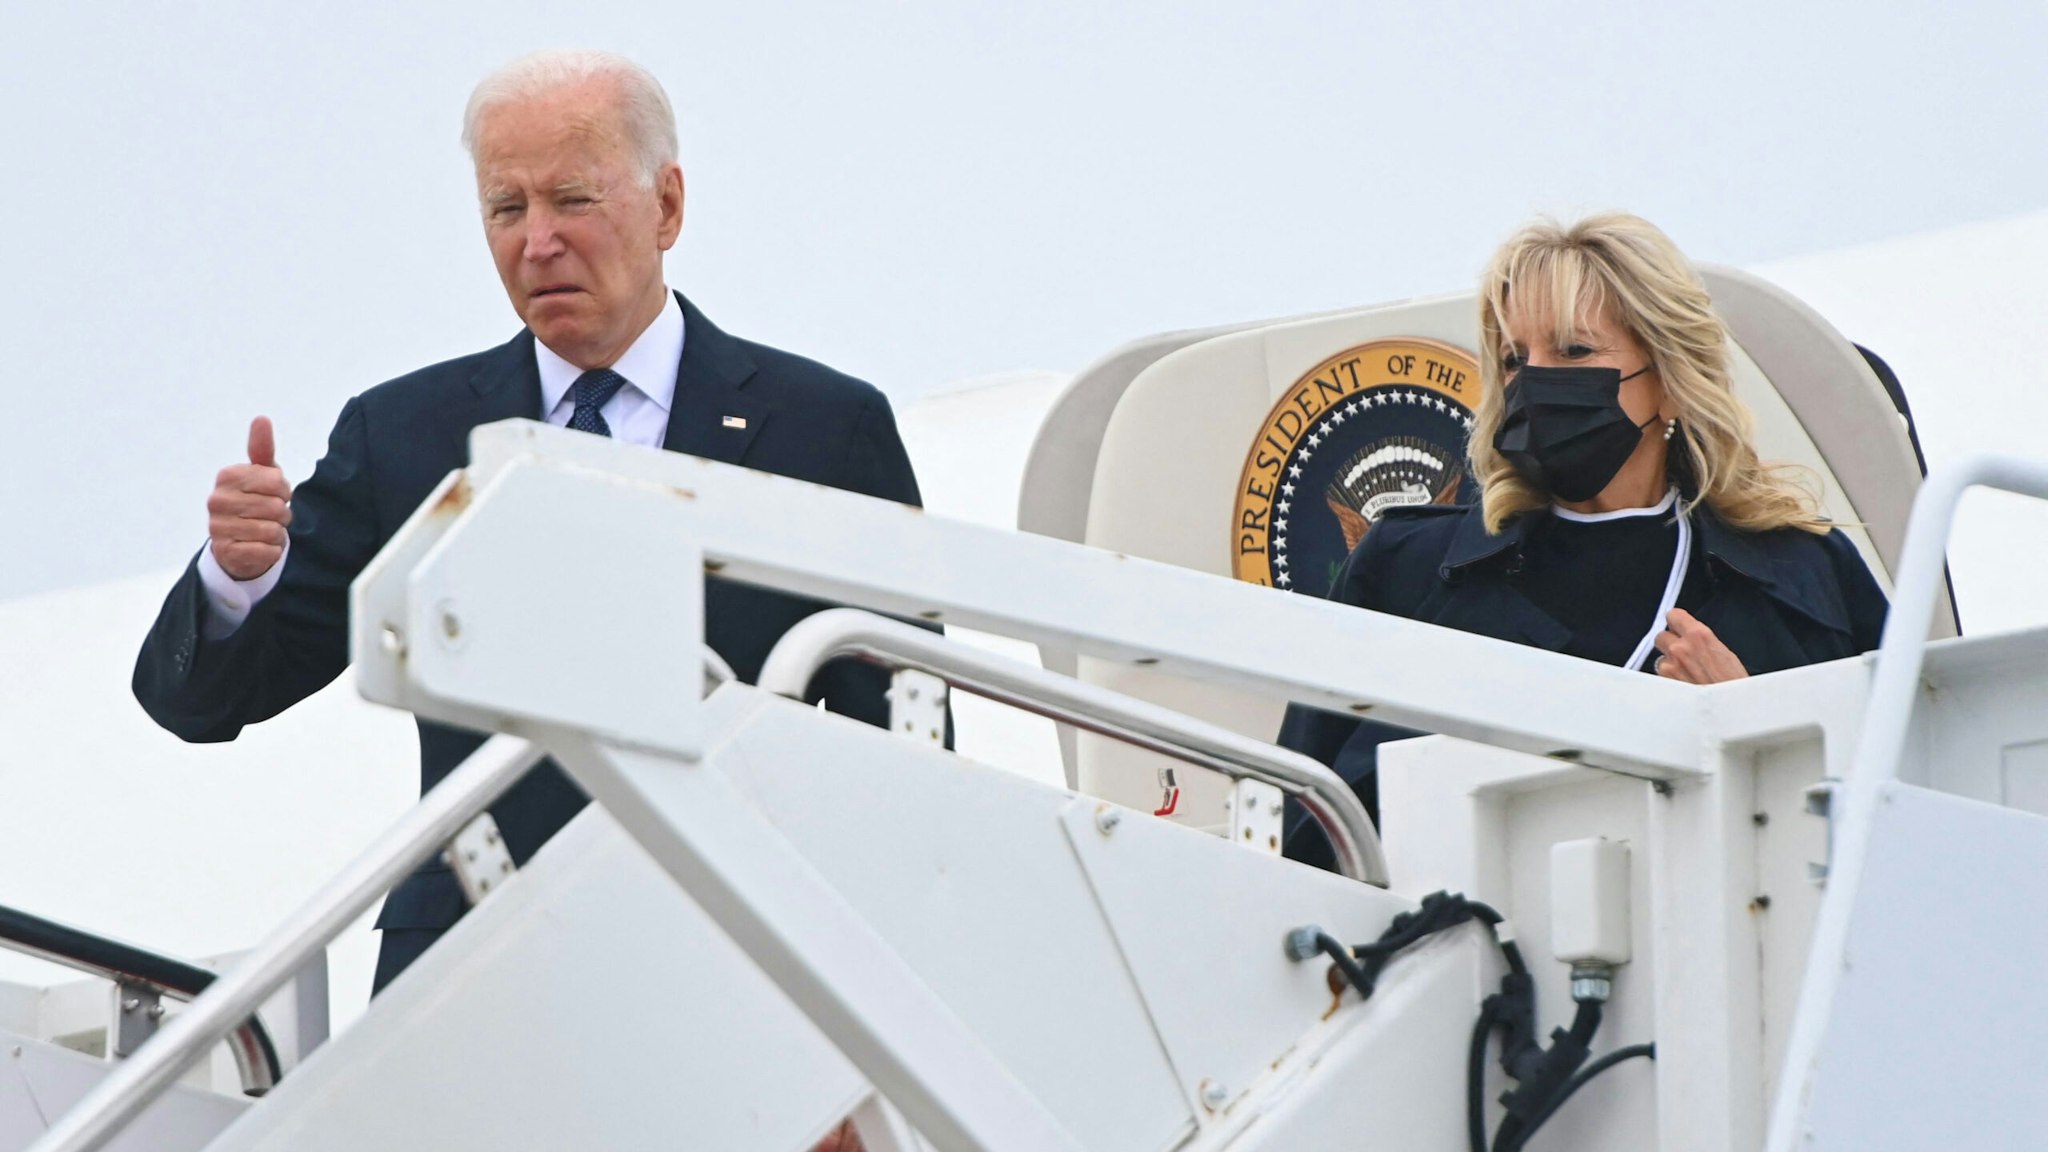 US President Joe Biden boards Air Force One prior to departure from Joint Base Andrews in Maryland, August, 29, 2021. - Biden travels to Dover Air Force Base in Delaware to attend the dignified transfer of the 13 members of the US military killed in Afghanistan last week.